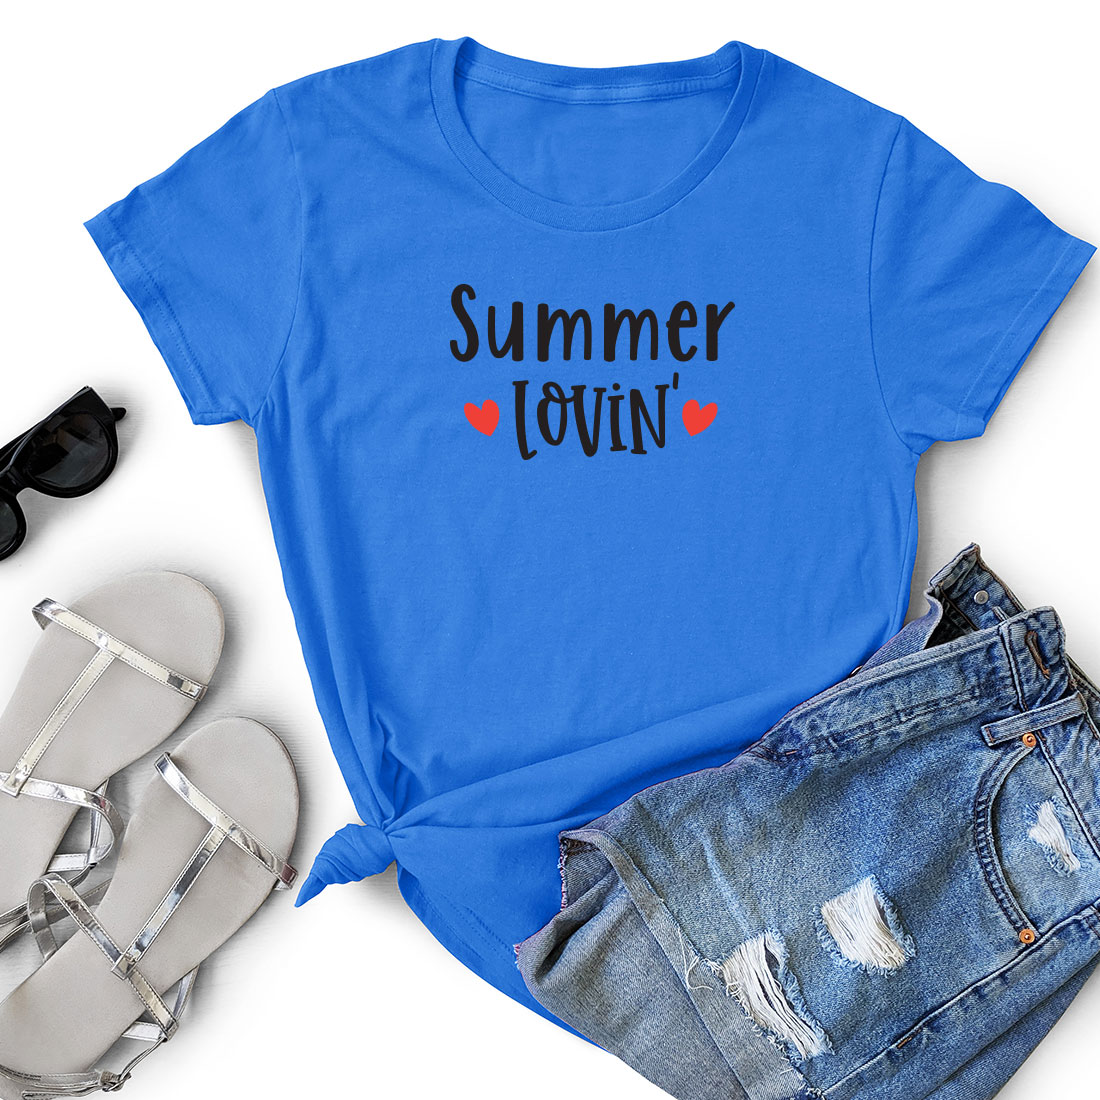 Blue shirt that says summer town next to a pair of shorts.